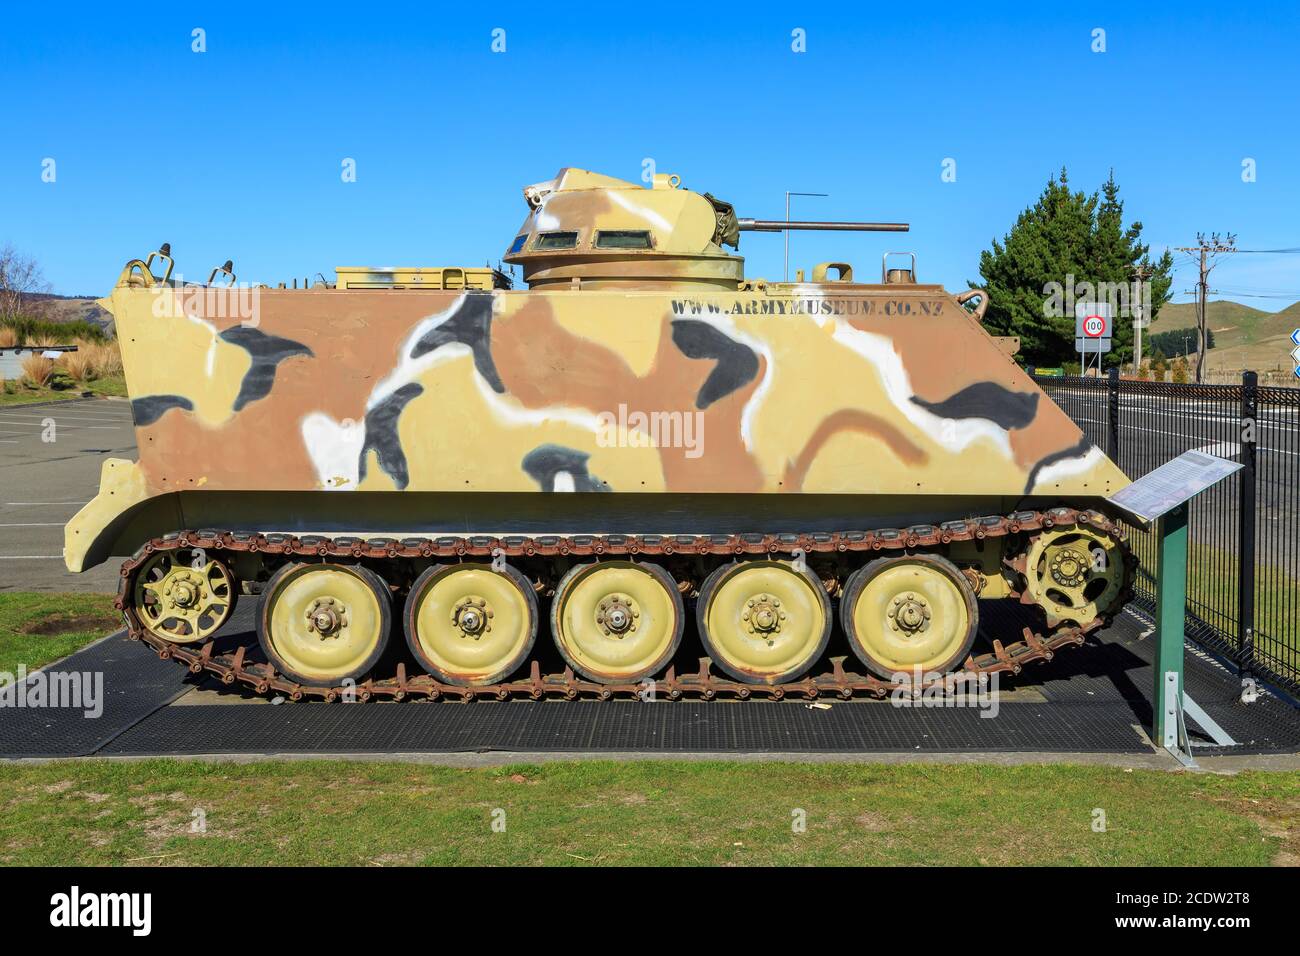 An American M113 armored personnel carrier with desert camouflage paintwork on display at the National Army Museum, Waiouru, New Zealand. Stock Photo